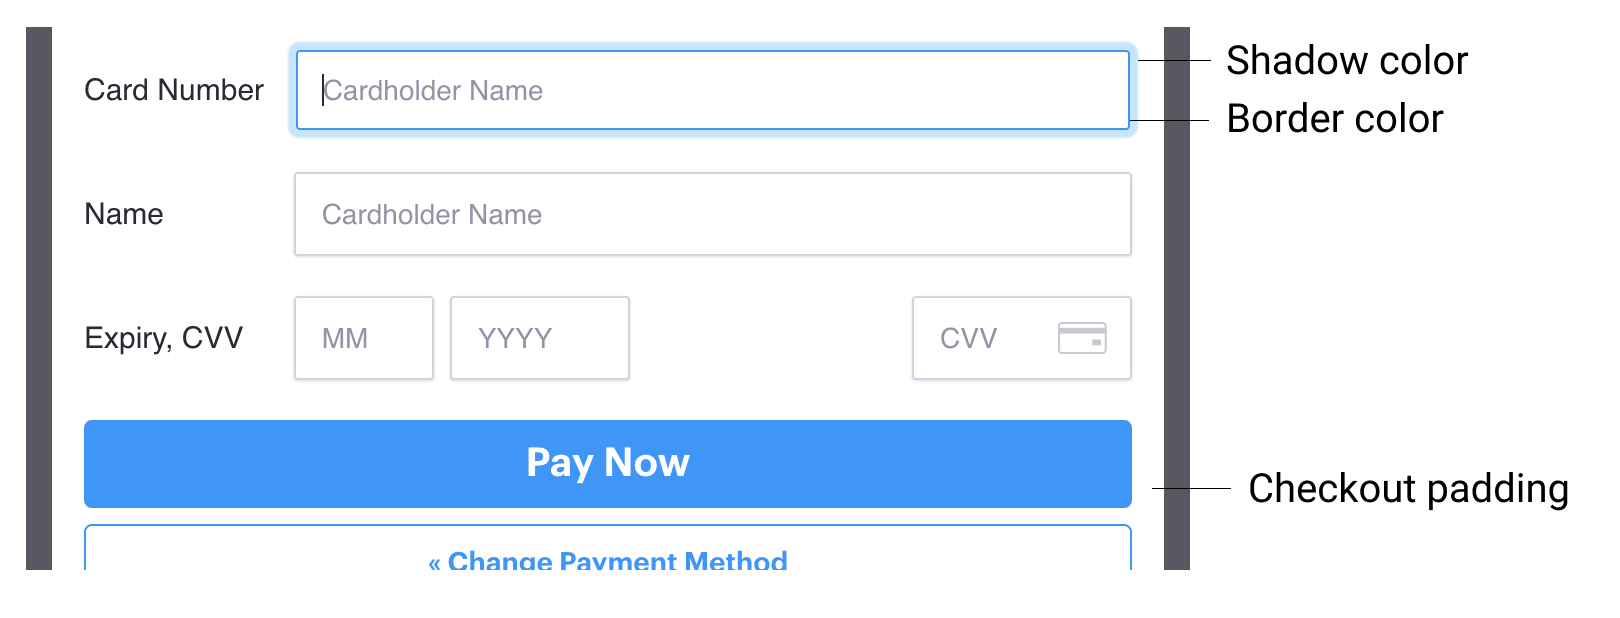 Illustration showing how fields in the customize screen relate to fields on a checkout